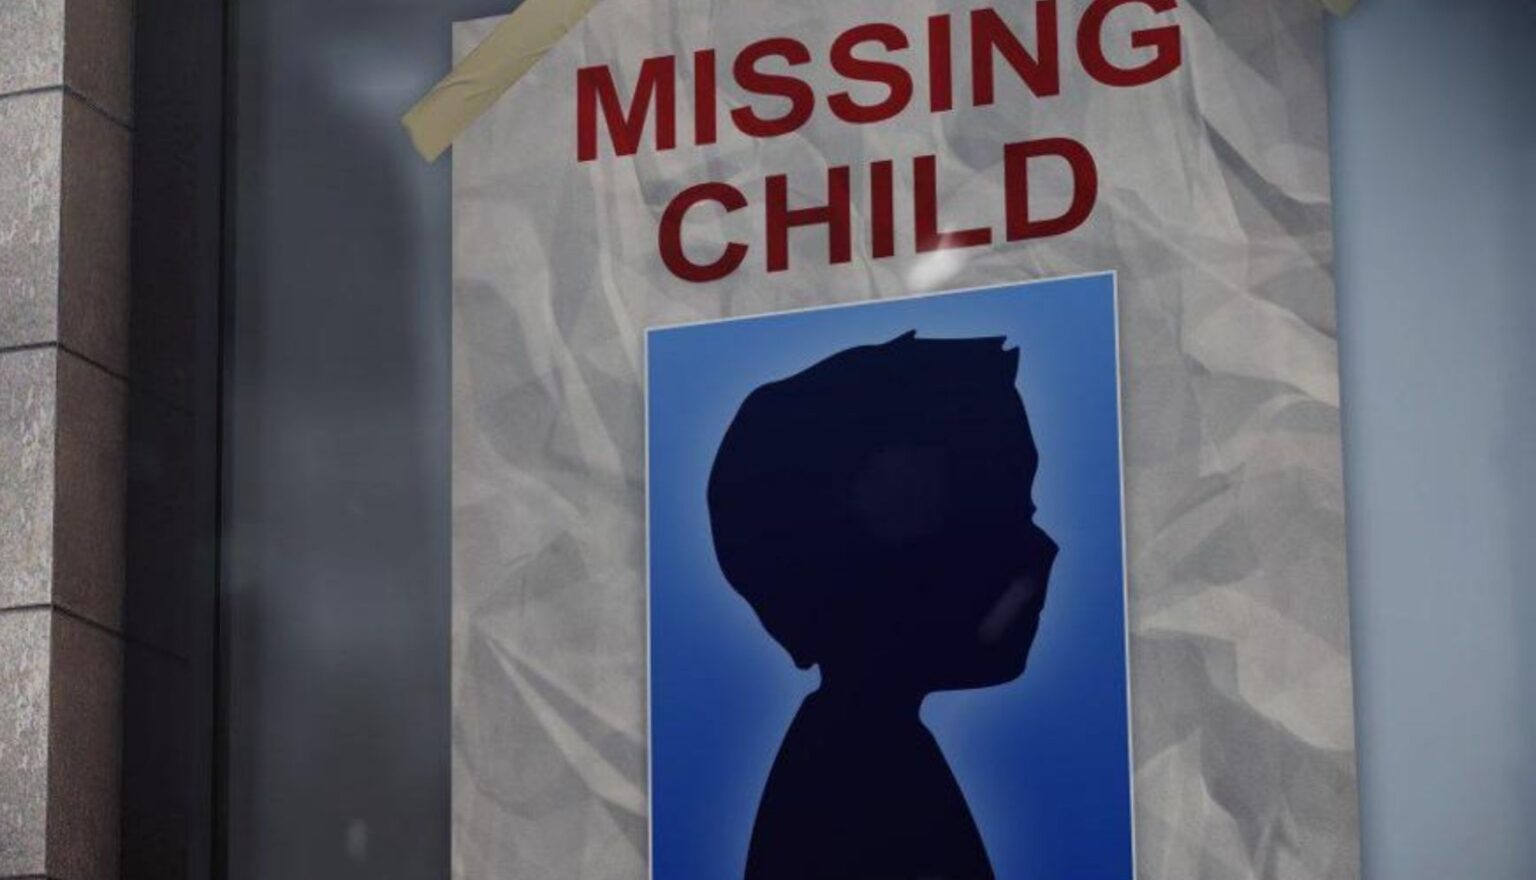 After thirty-five years, many wonder if Ara Johnson will ever be found. Unravel this missing kid case and see if Ara Johnson could possibly still be alive.